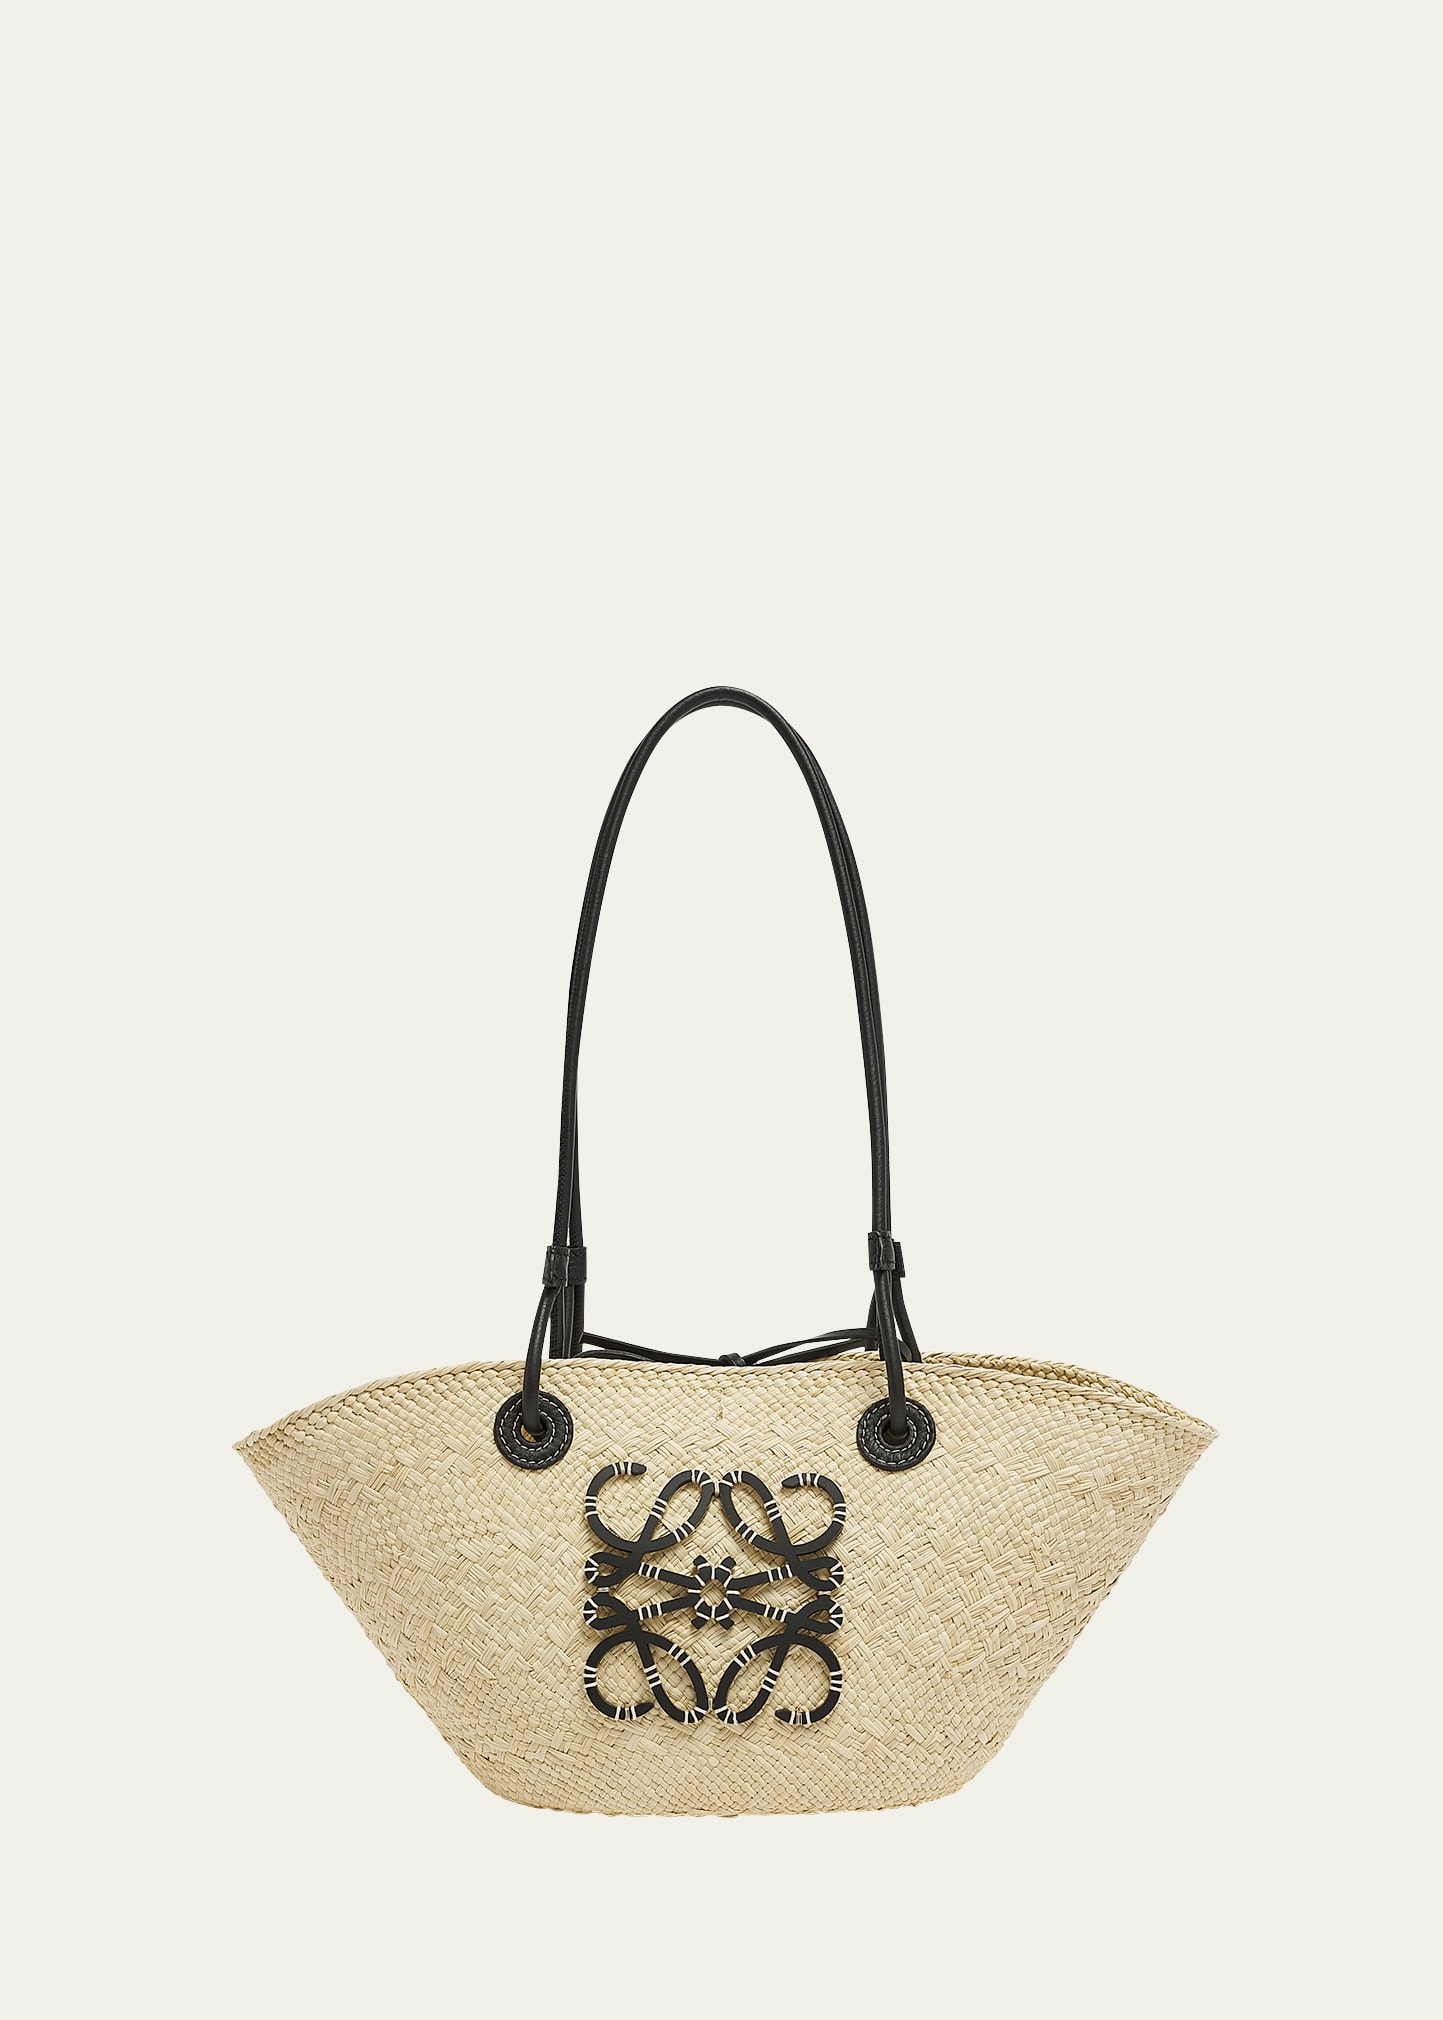 Loewe X Paula's Ibiza Anagram Small Basket Bag In Iraca Palm With Leather Handles In 2165 Naturalblack